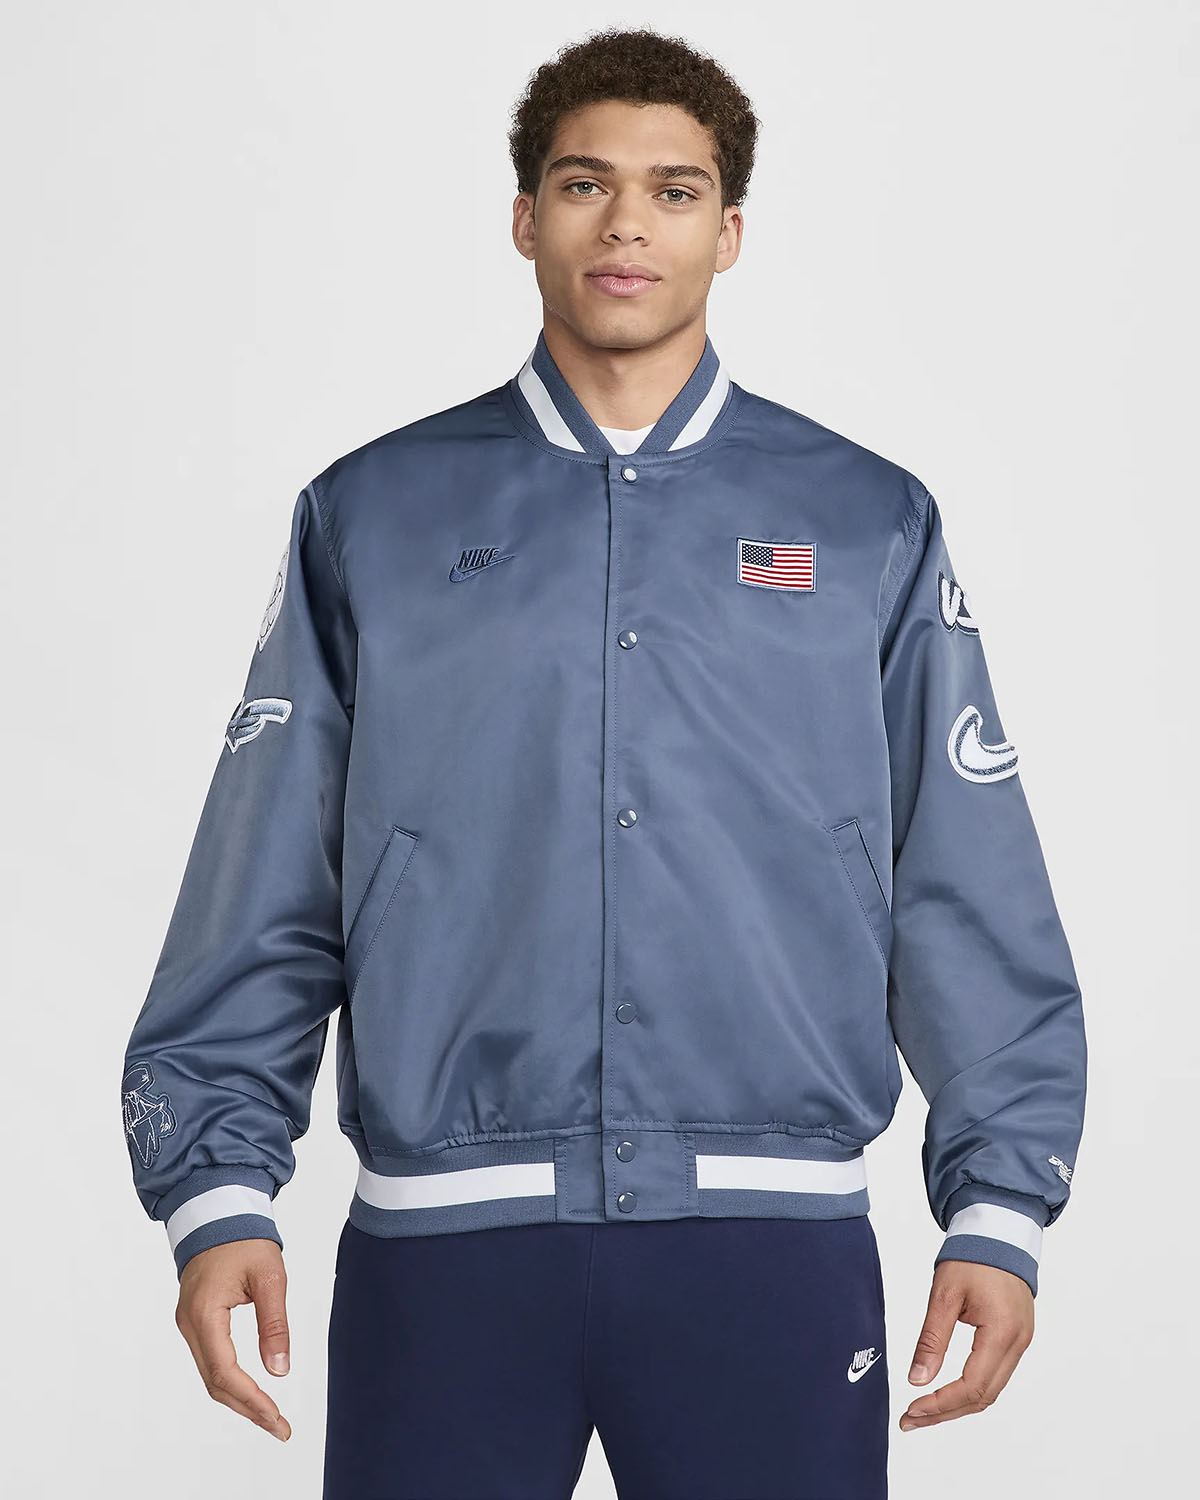 NIke USA Breaking Dugout Satin Jacket Diffused Blue 1